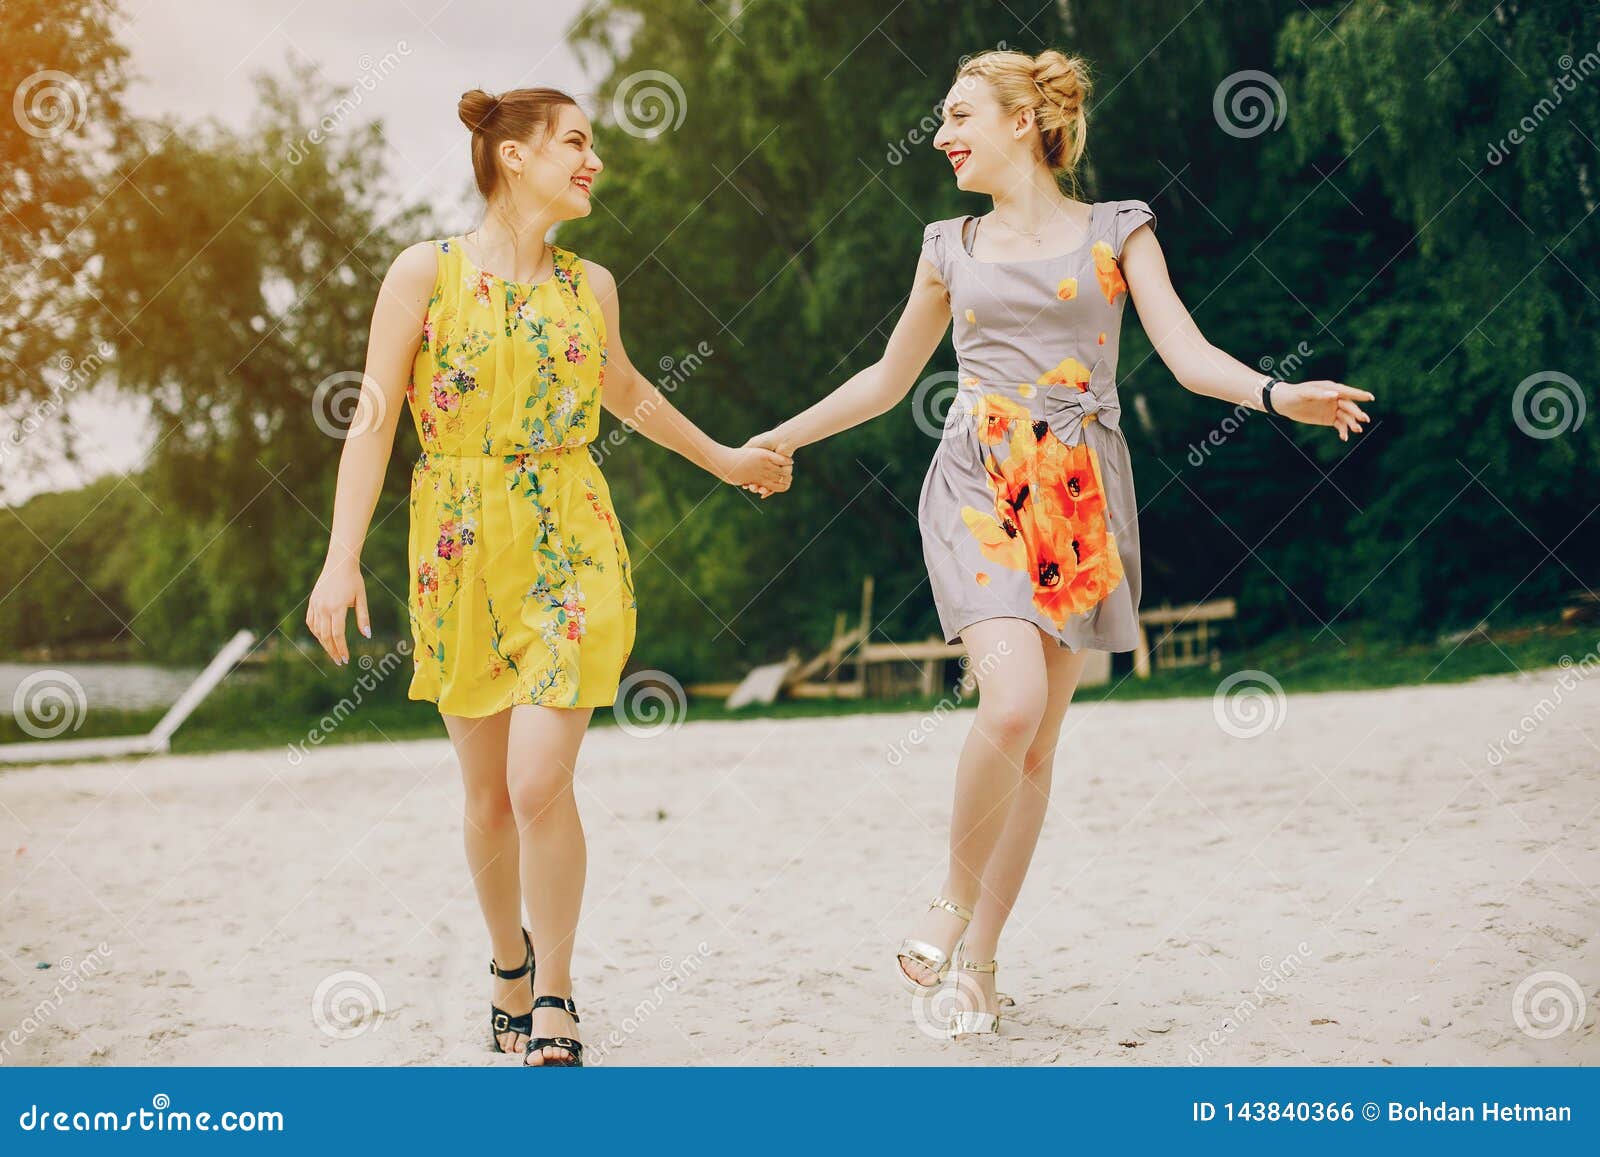 Two Pretty Girls in a Summer Park Stock Photo - Image of dress, girls ...